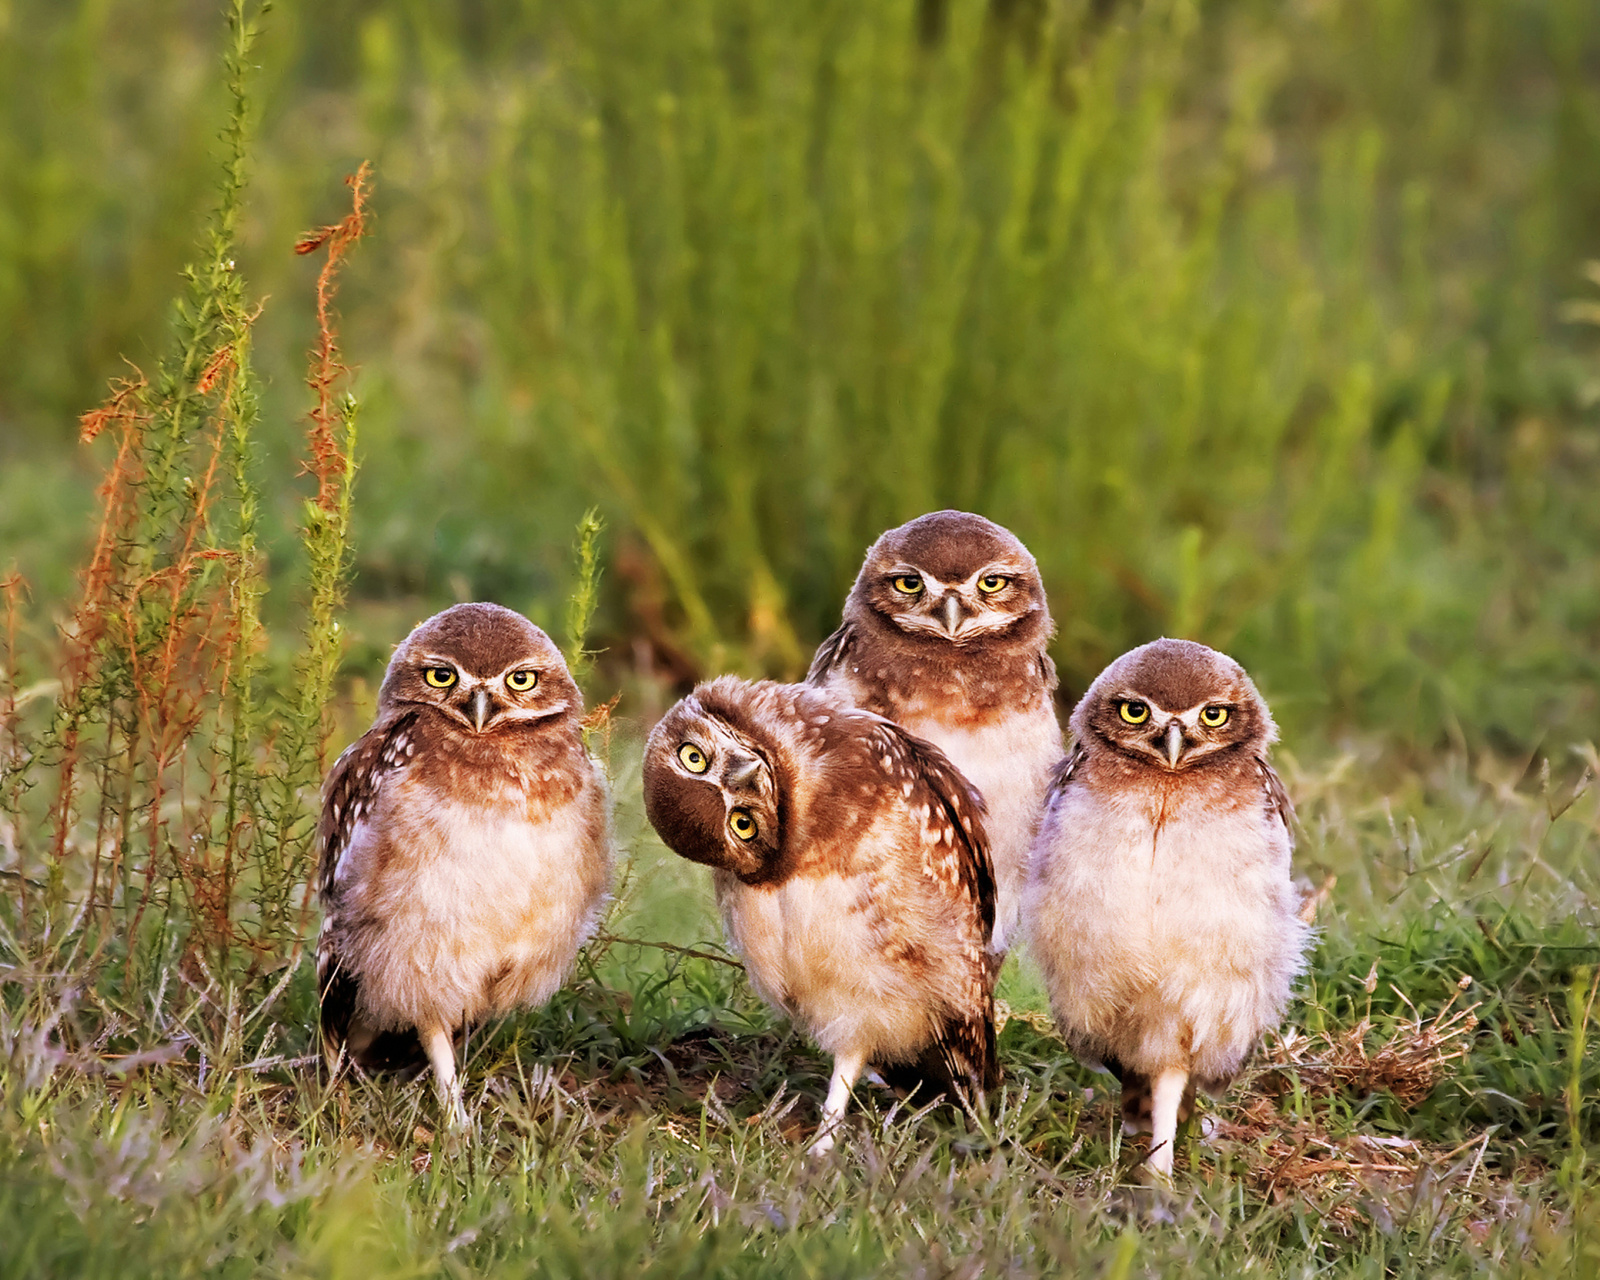 Das Morning with owls Wallpaper 1600x1280